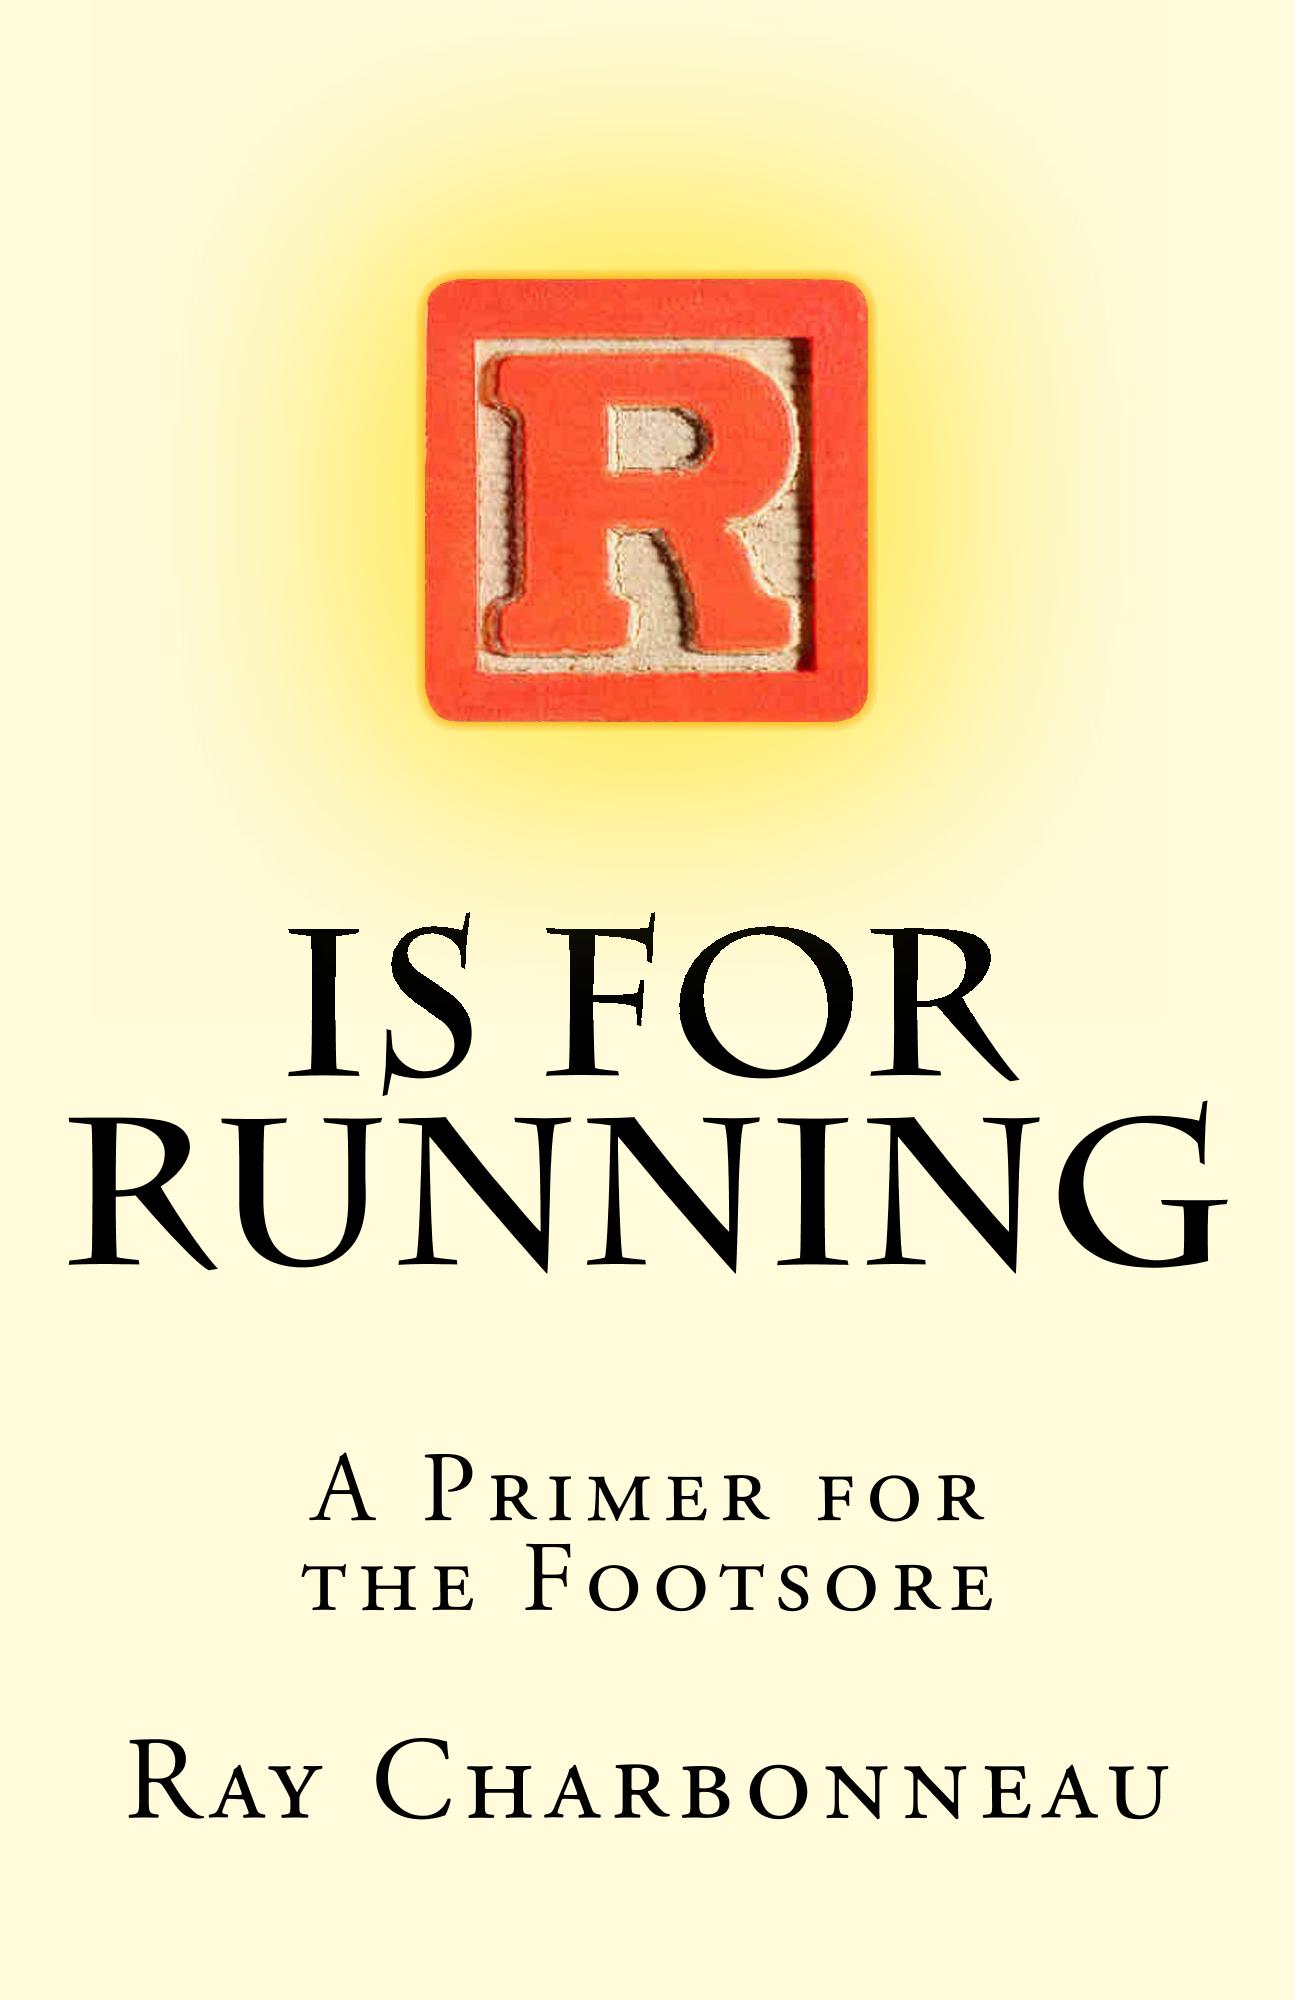 r is for running